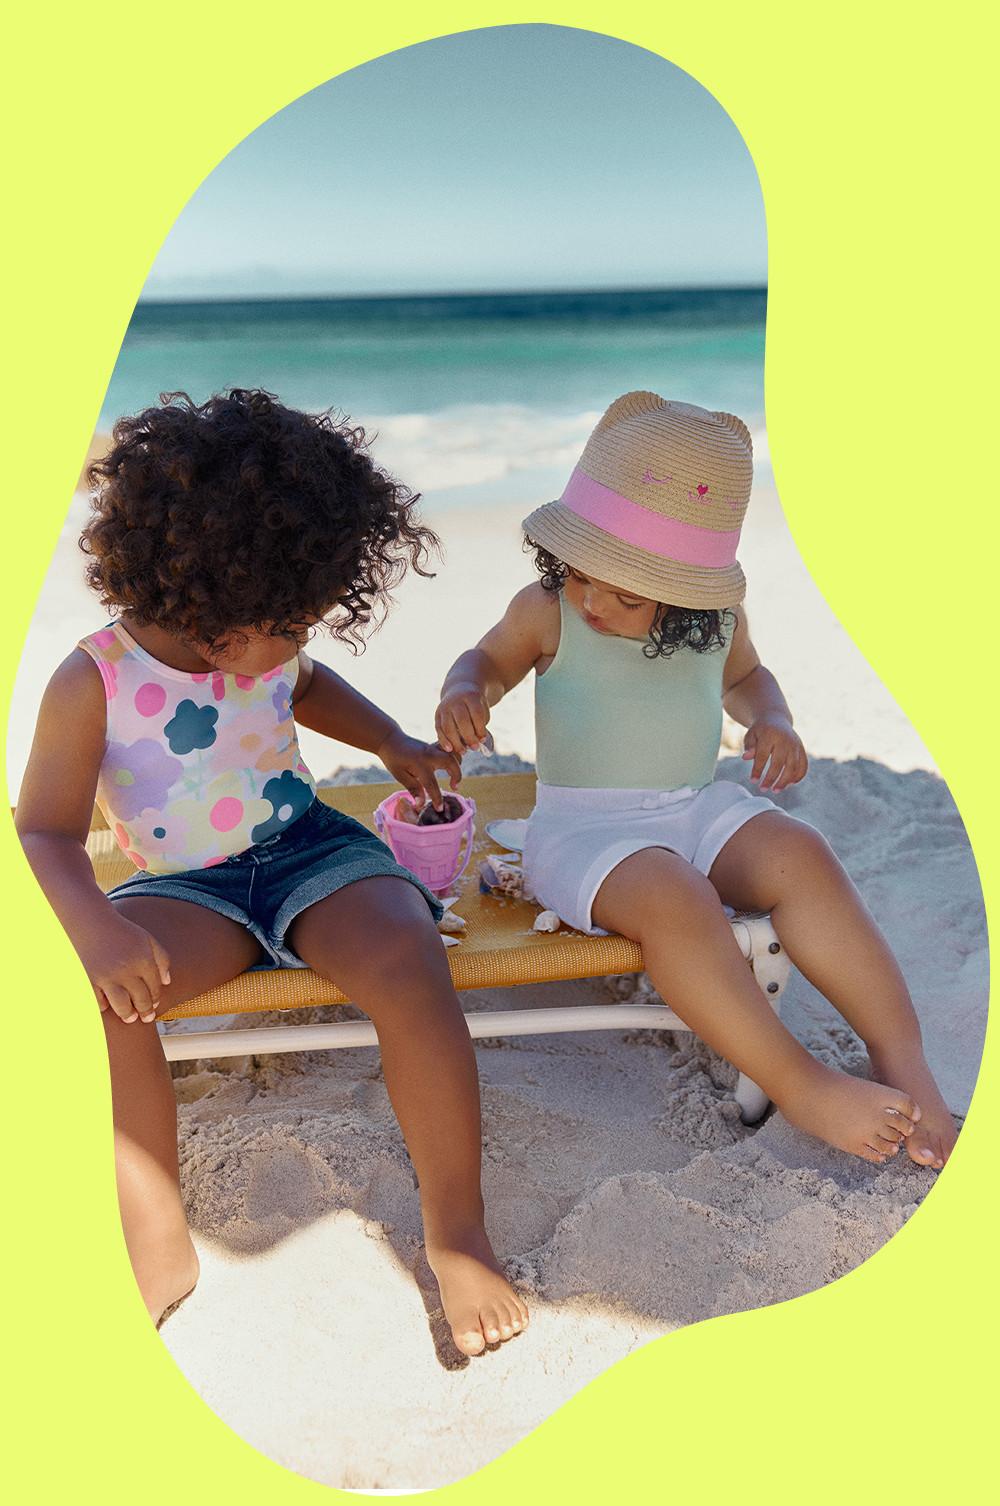 Children wear swimsuits, shorts and hats